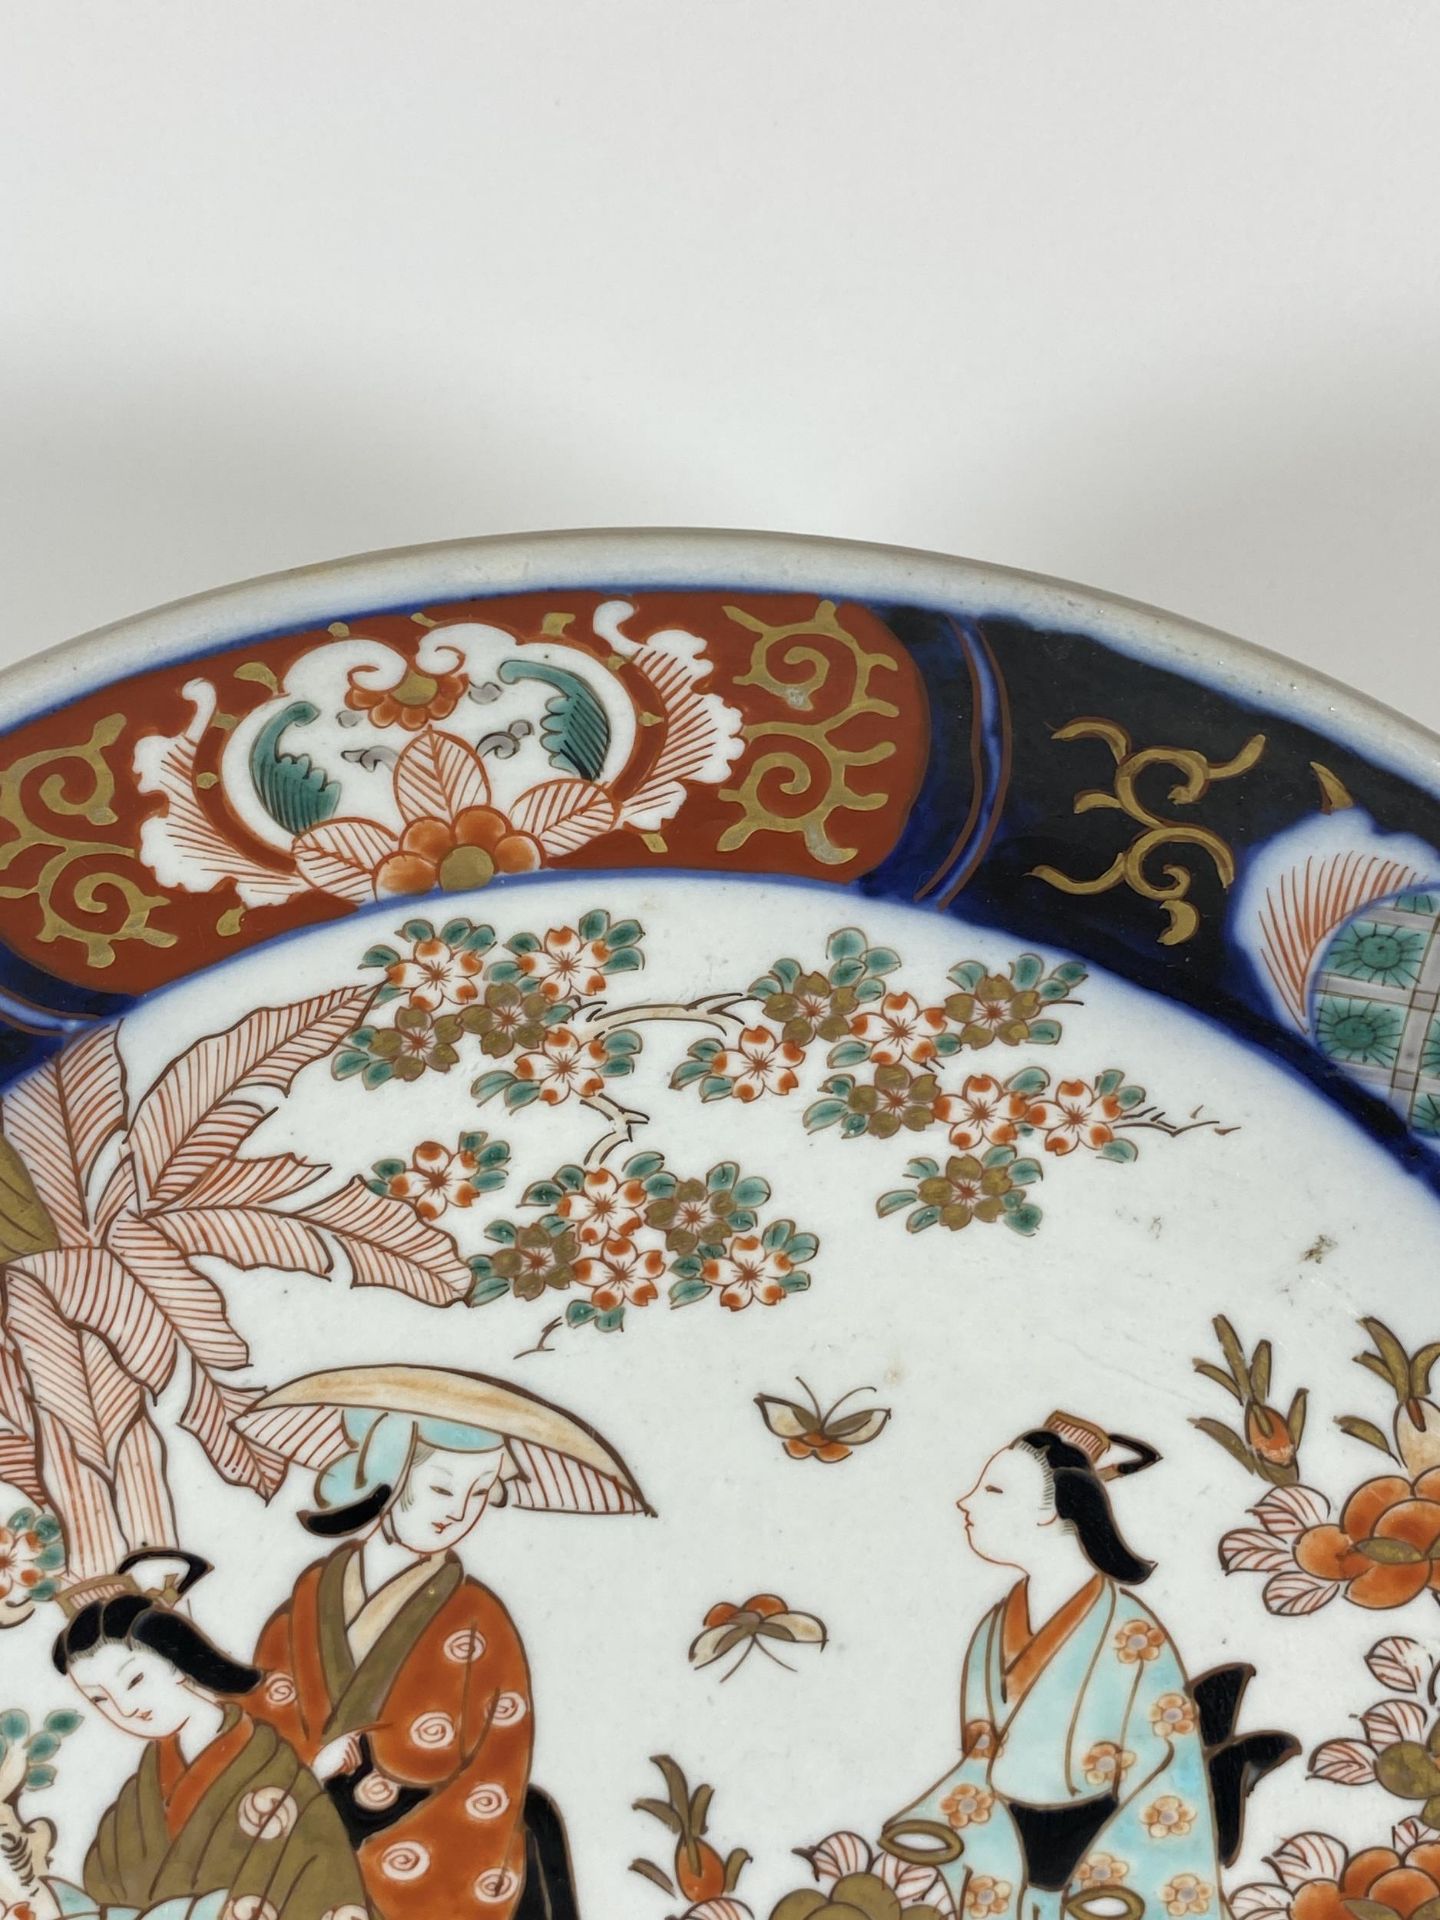 A LARGE JAPANESE MEIJI PERIOD (1868-1912) IMARI CHARGER WITH FIGURAL DESIGN, DIAMETER 31.5CM - Image 3 of 7